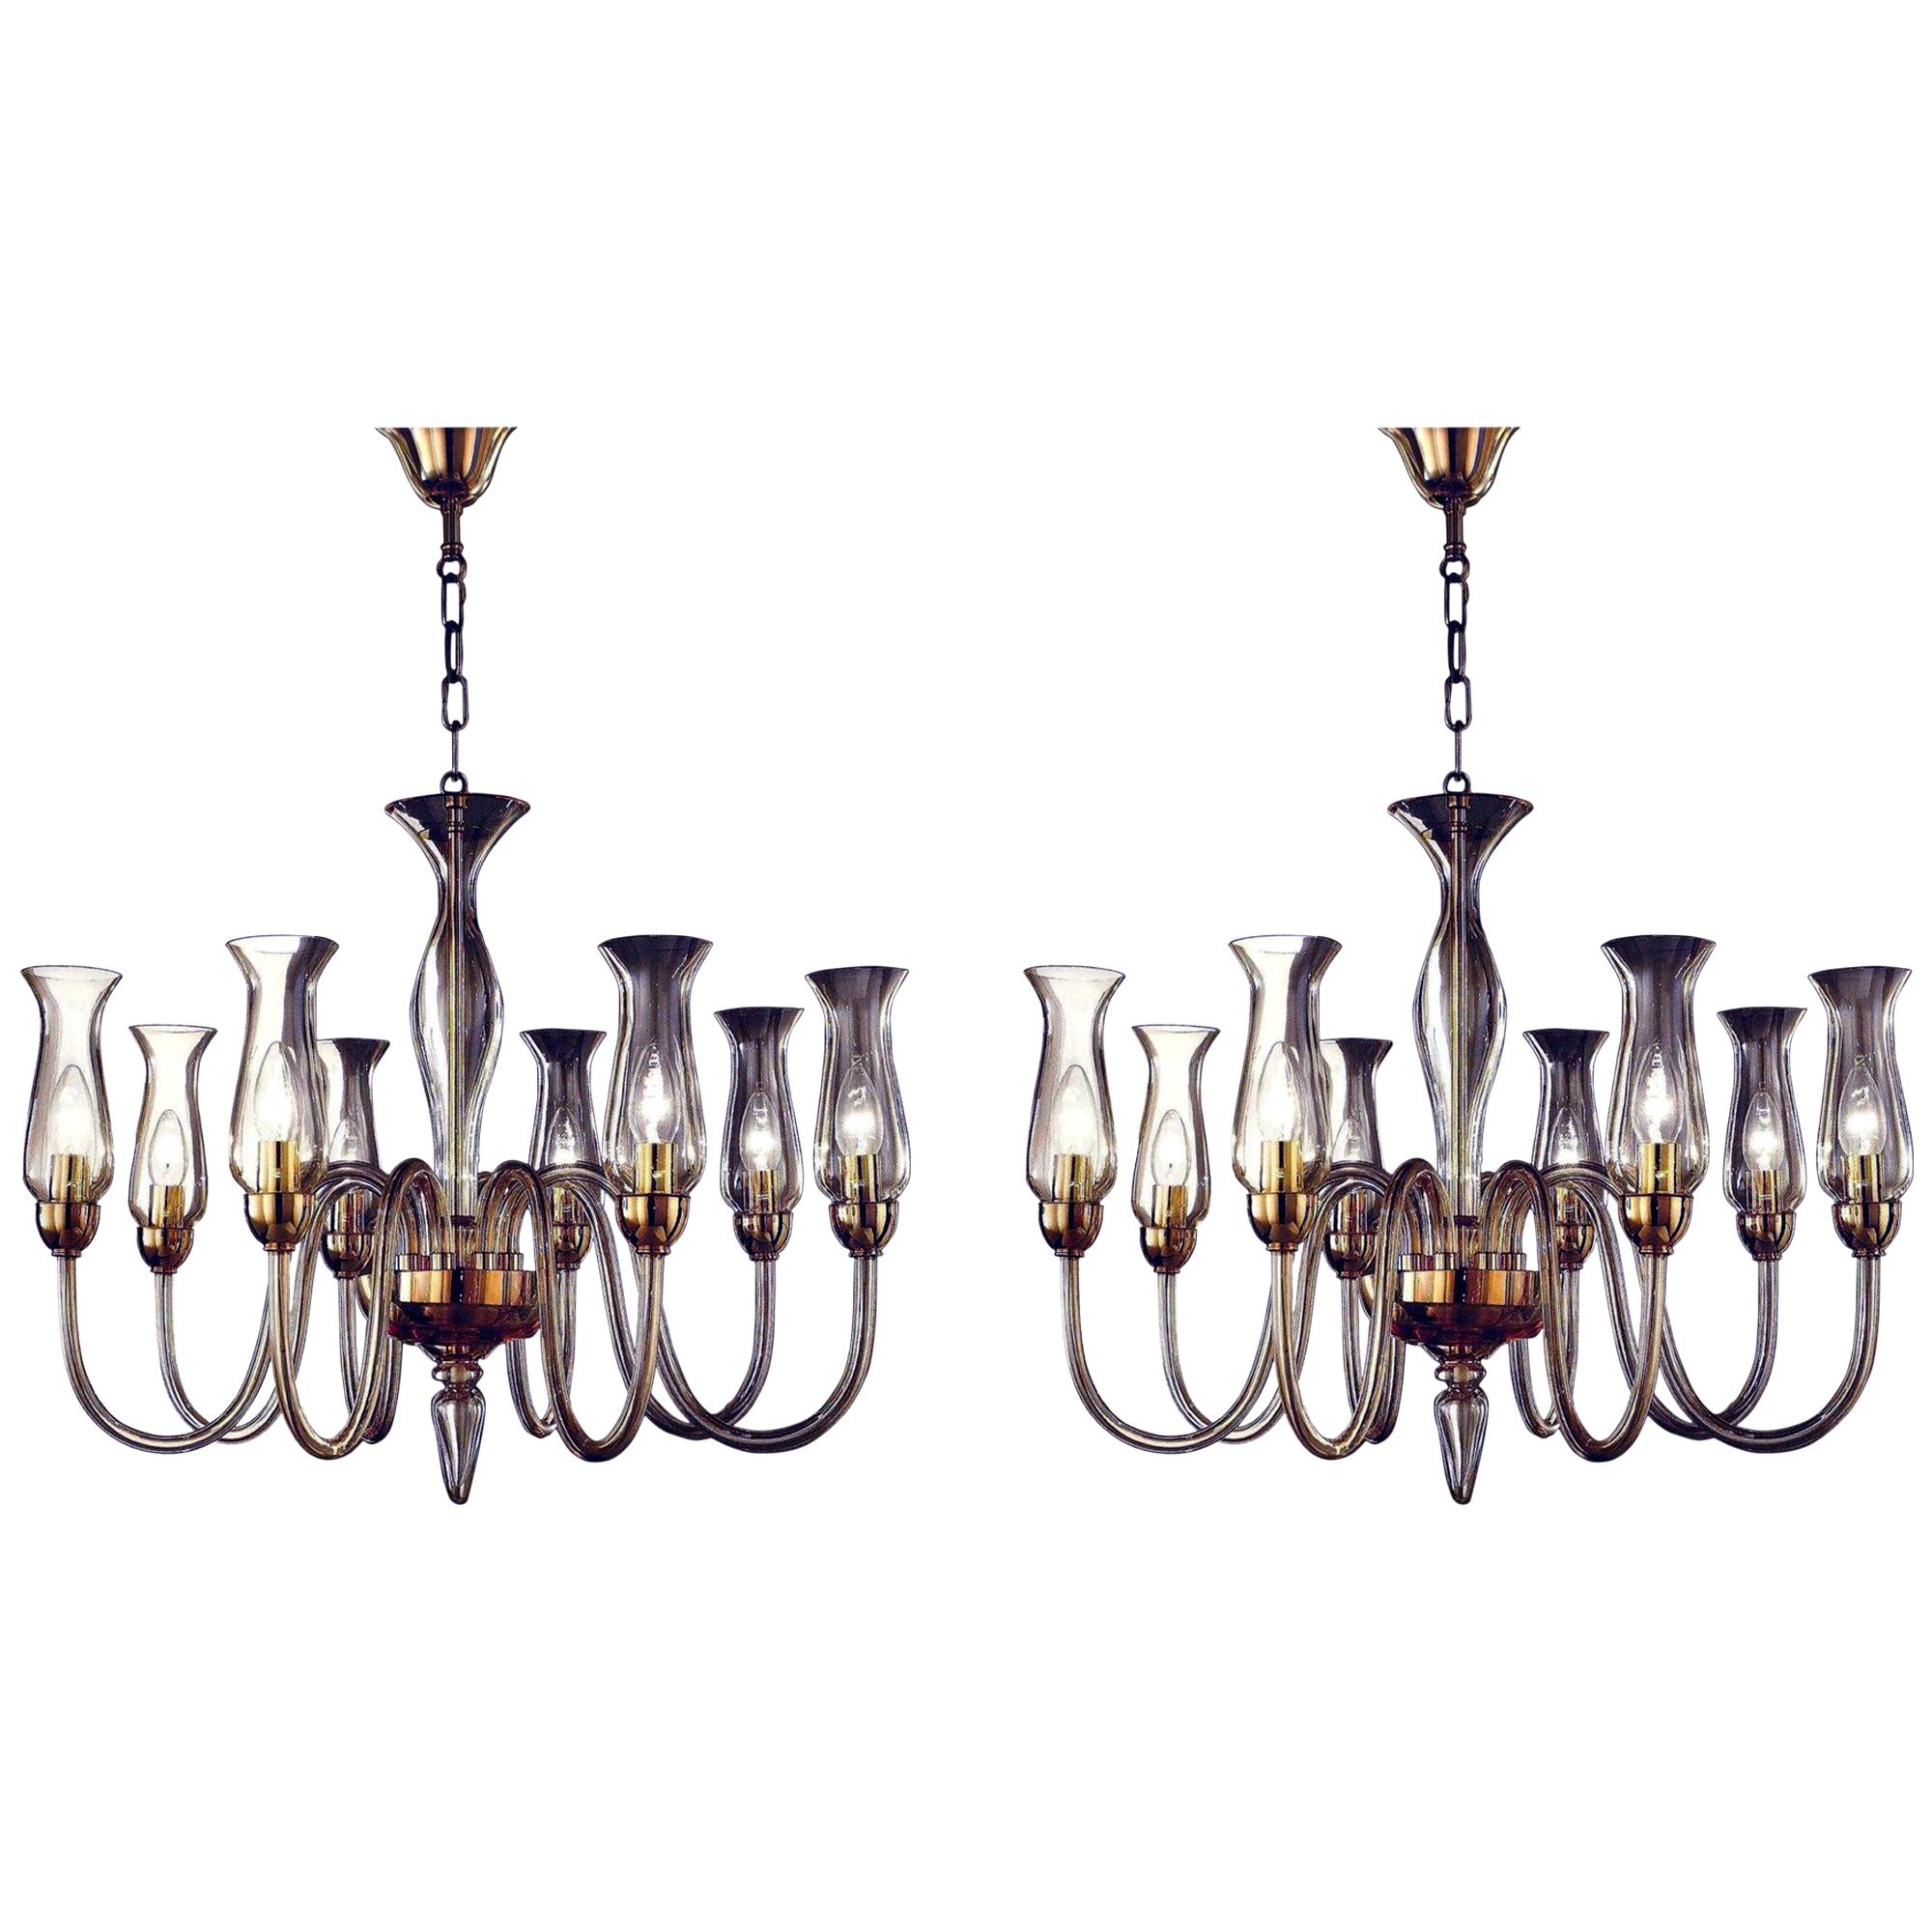 Two Italian Modern Neoclassical Amber Murano Glass Chandeliers with Glass Shades